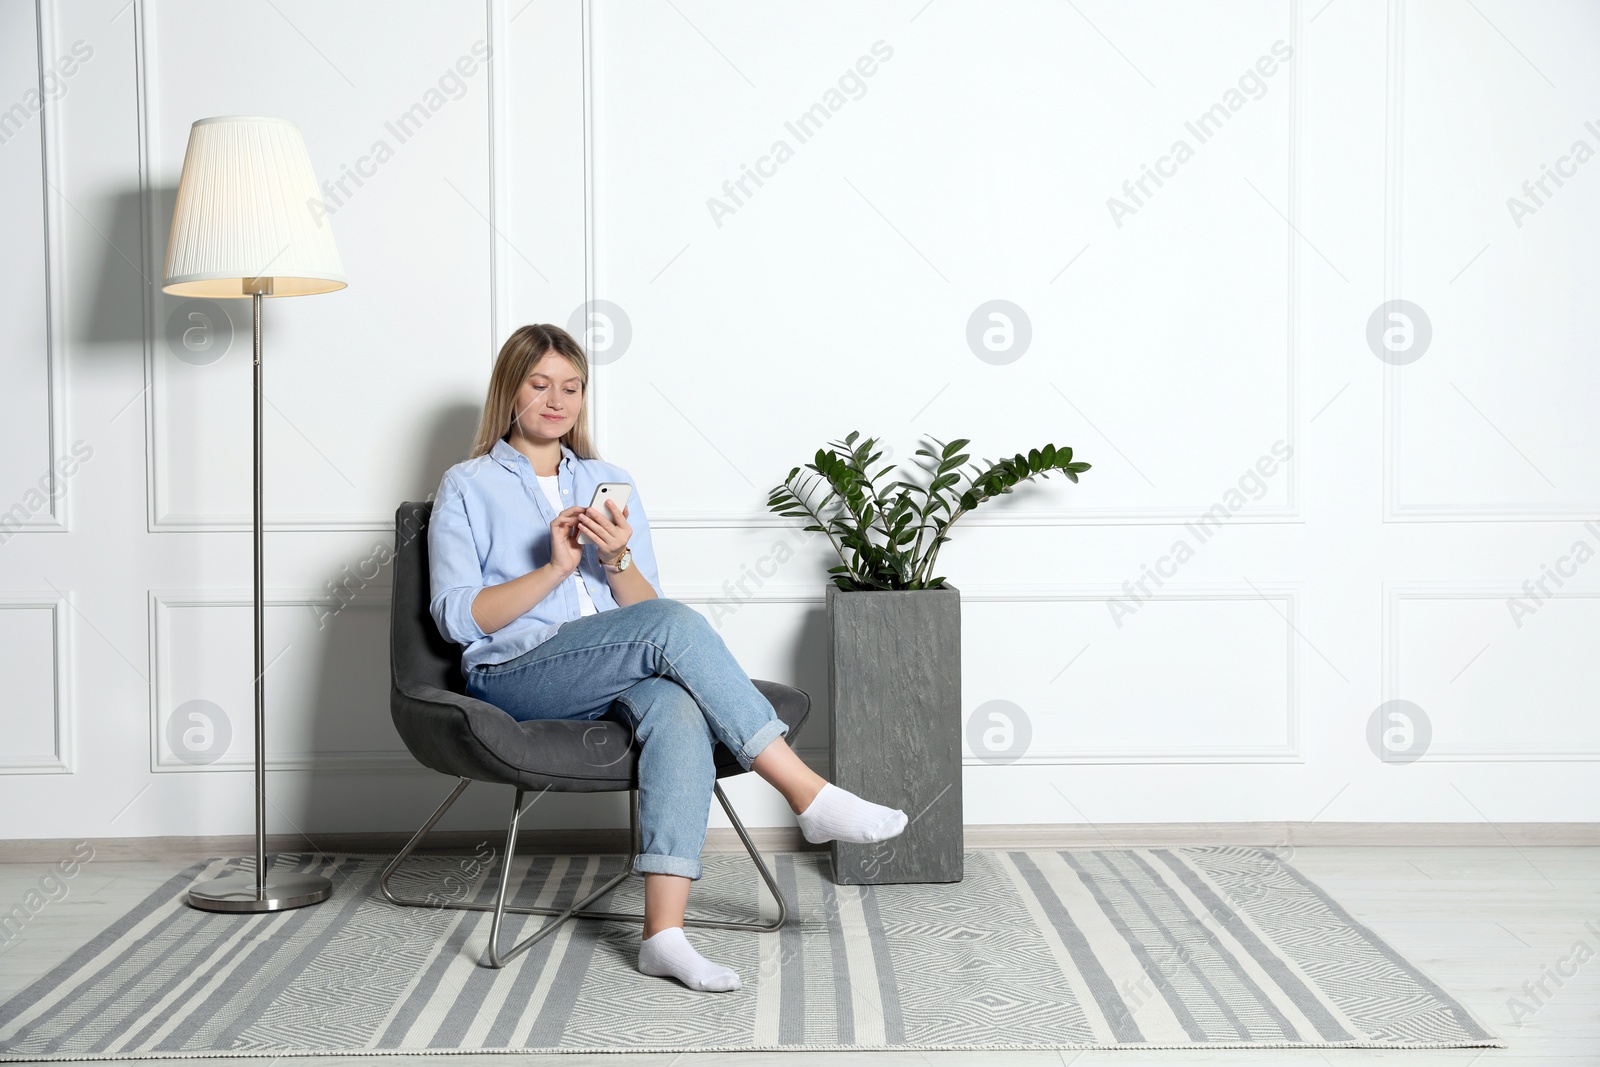 Photo of Young woman with phone sitting in armchair at home, space for text. Interior design